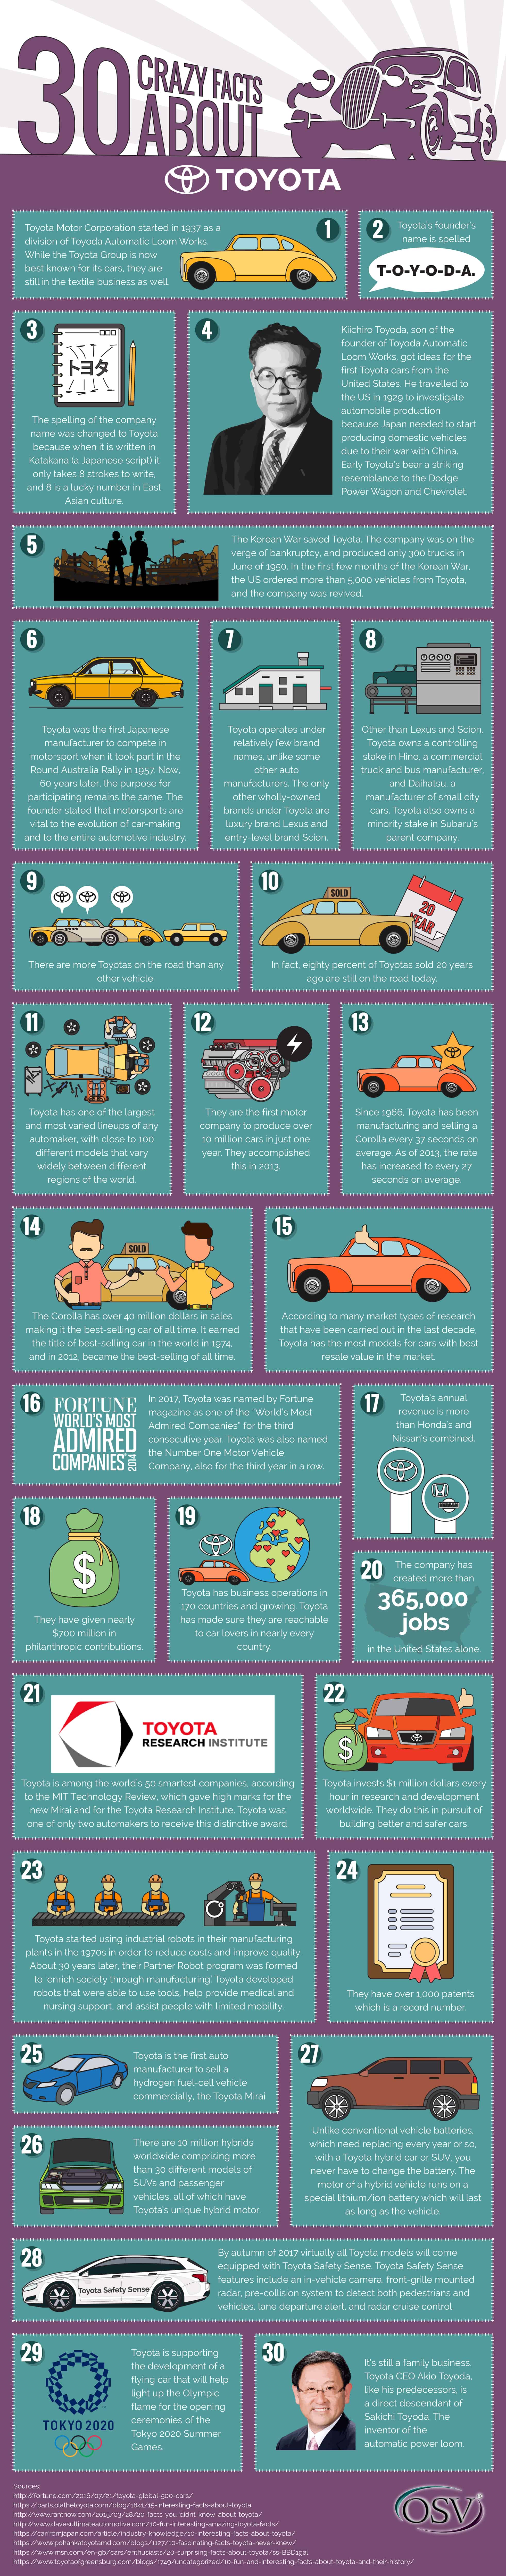 All About the World’s No:1 Auto Brand: 30 Crazy Facts About Toyota - Infographic